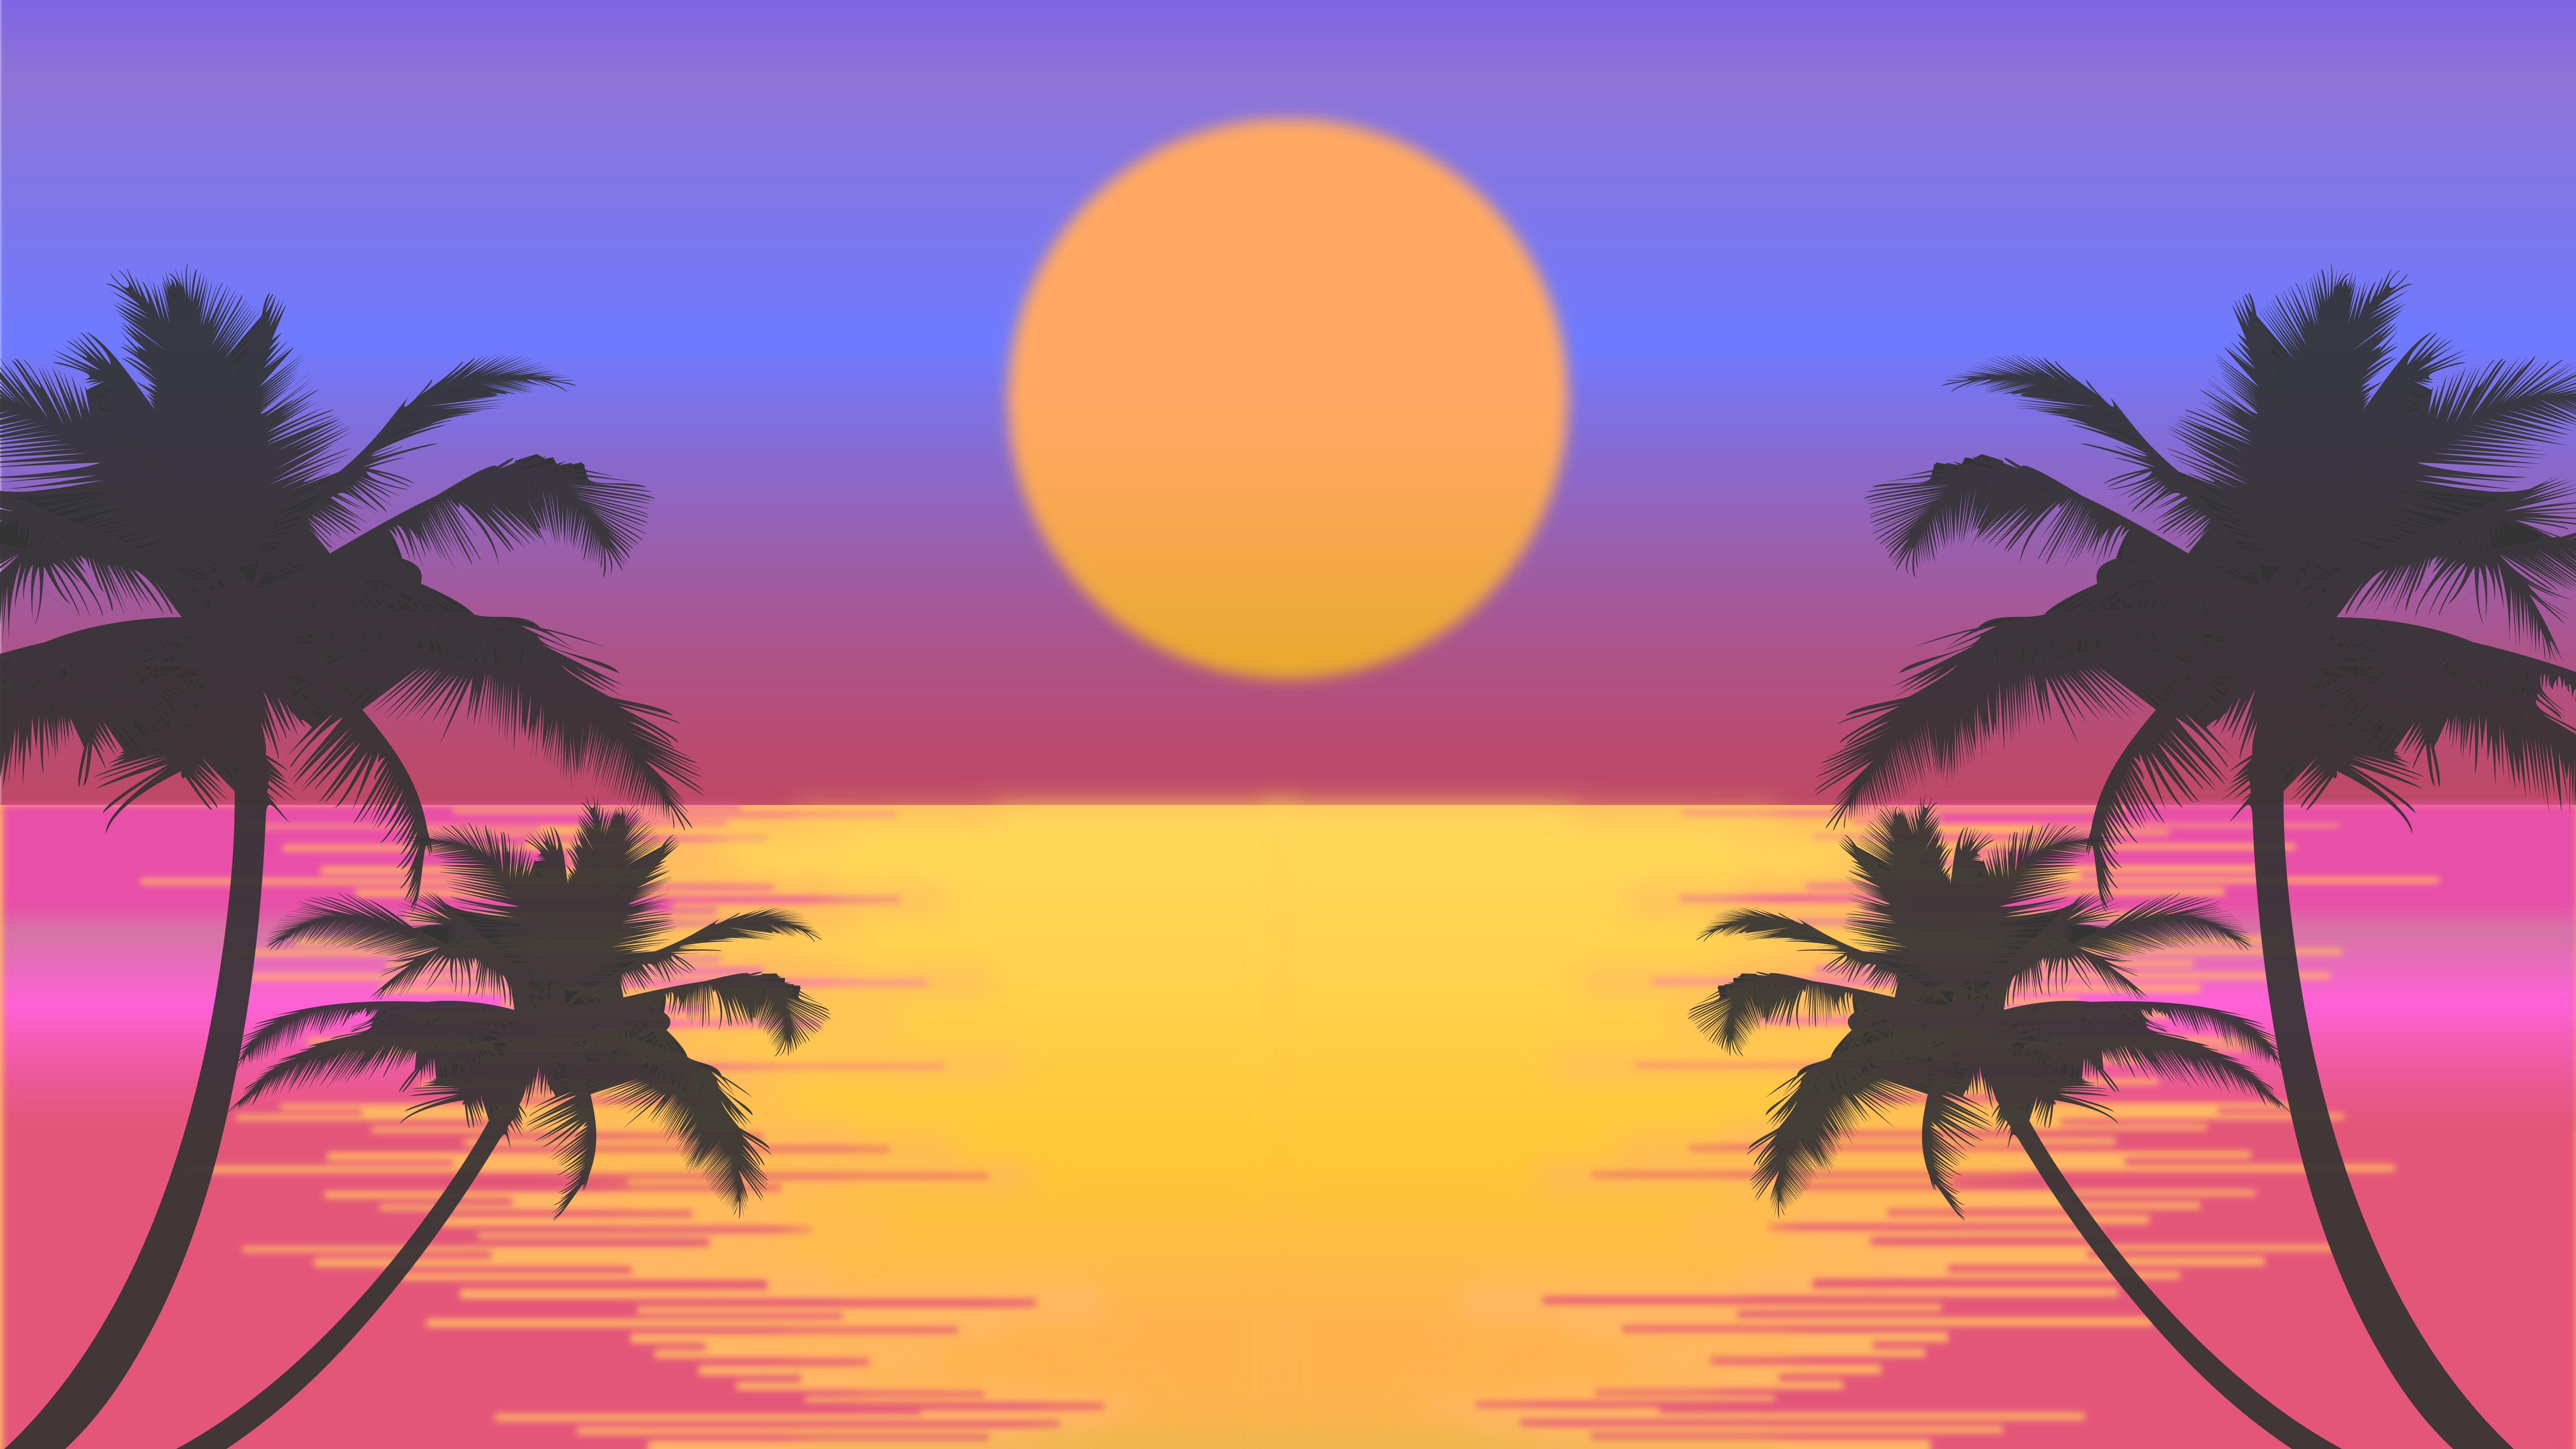 Retro Sunset Reflection on Water 8k Ultra HD Wallpapers